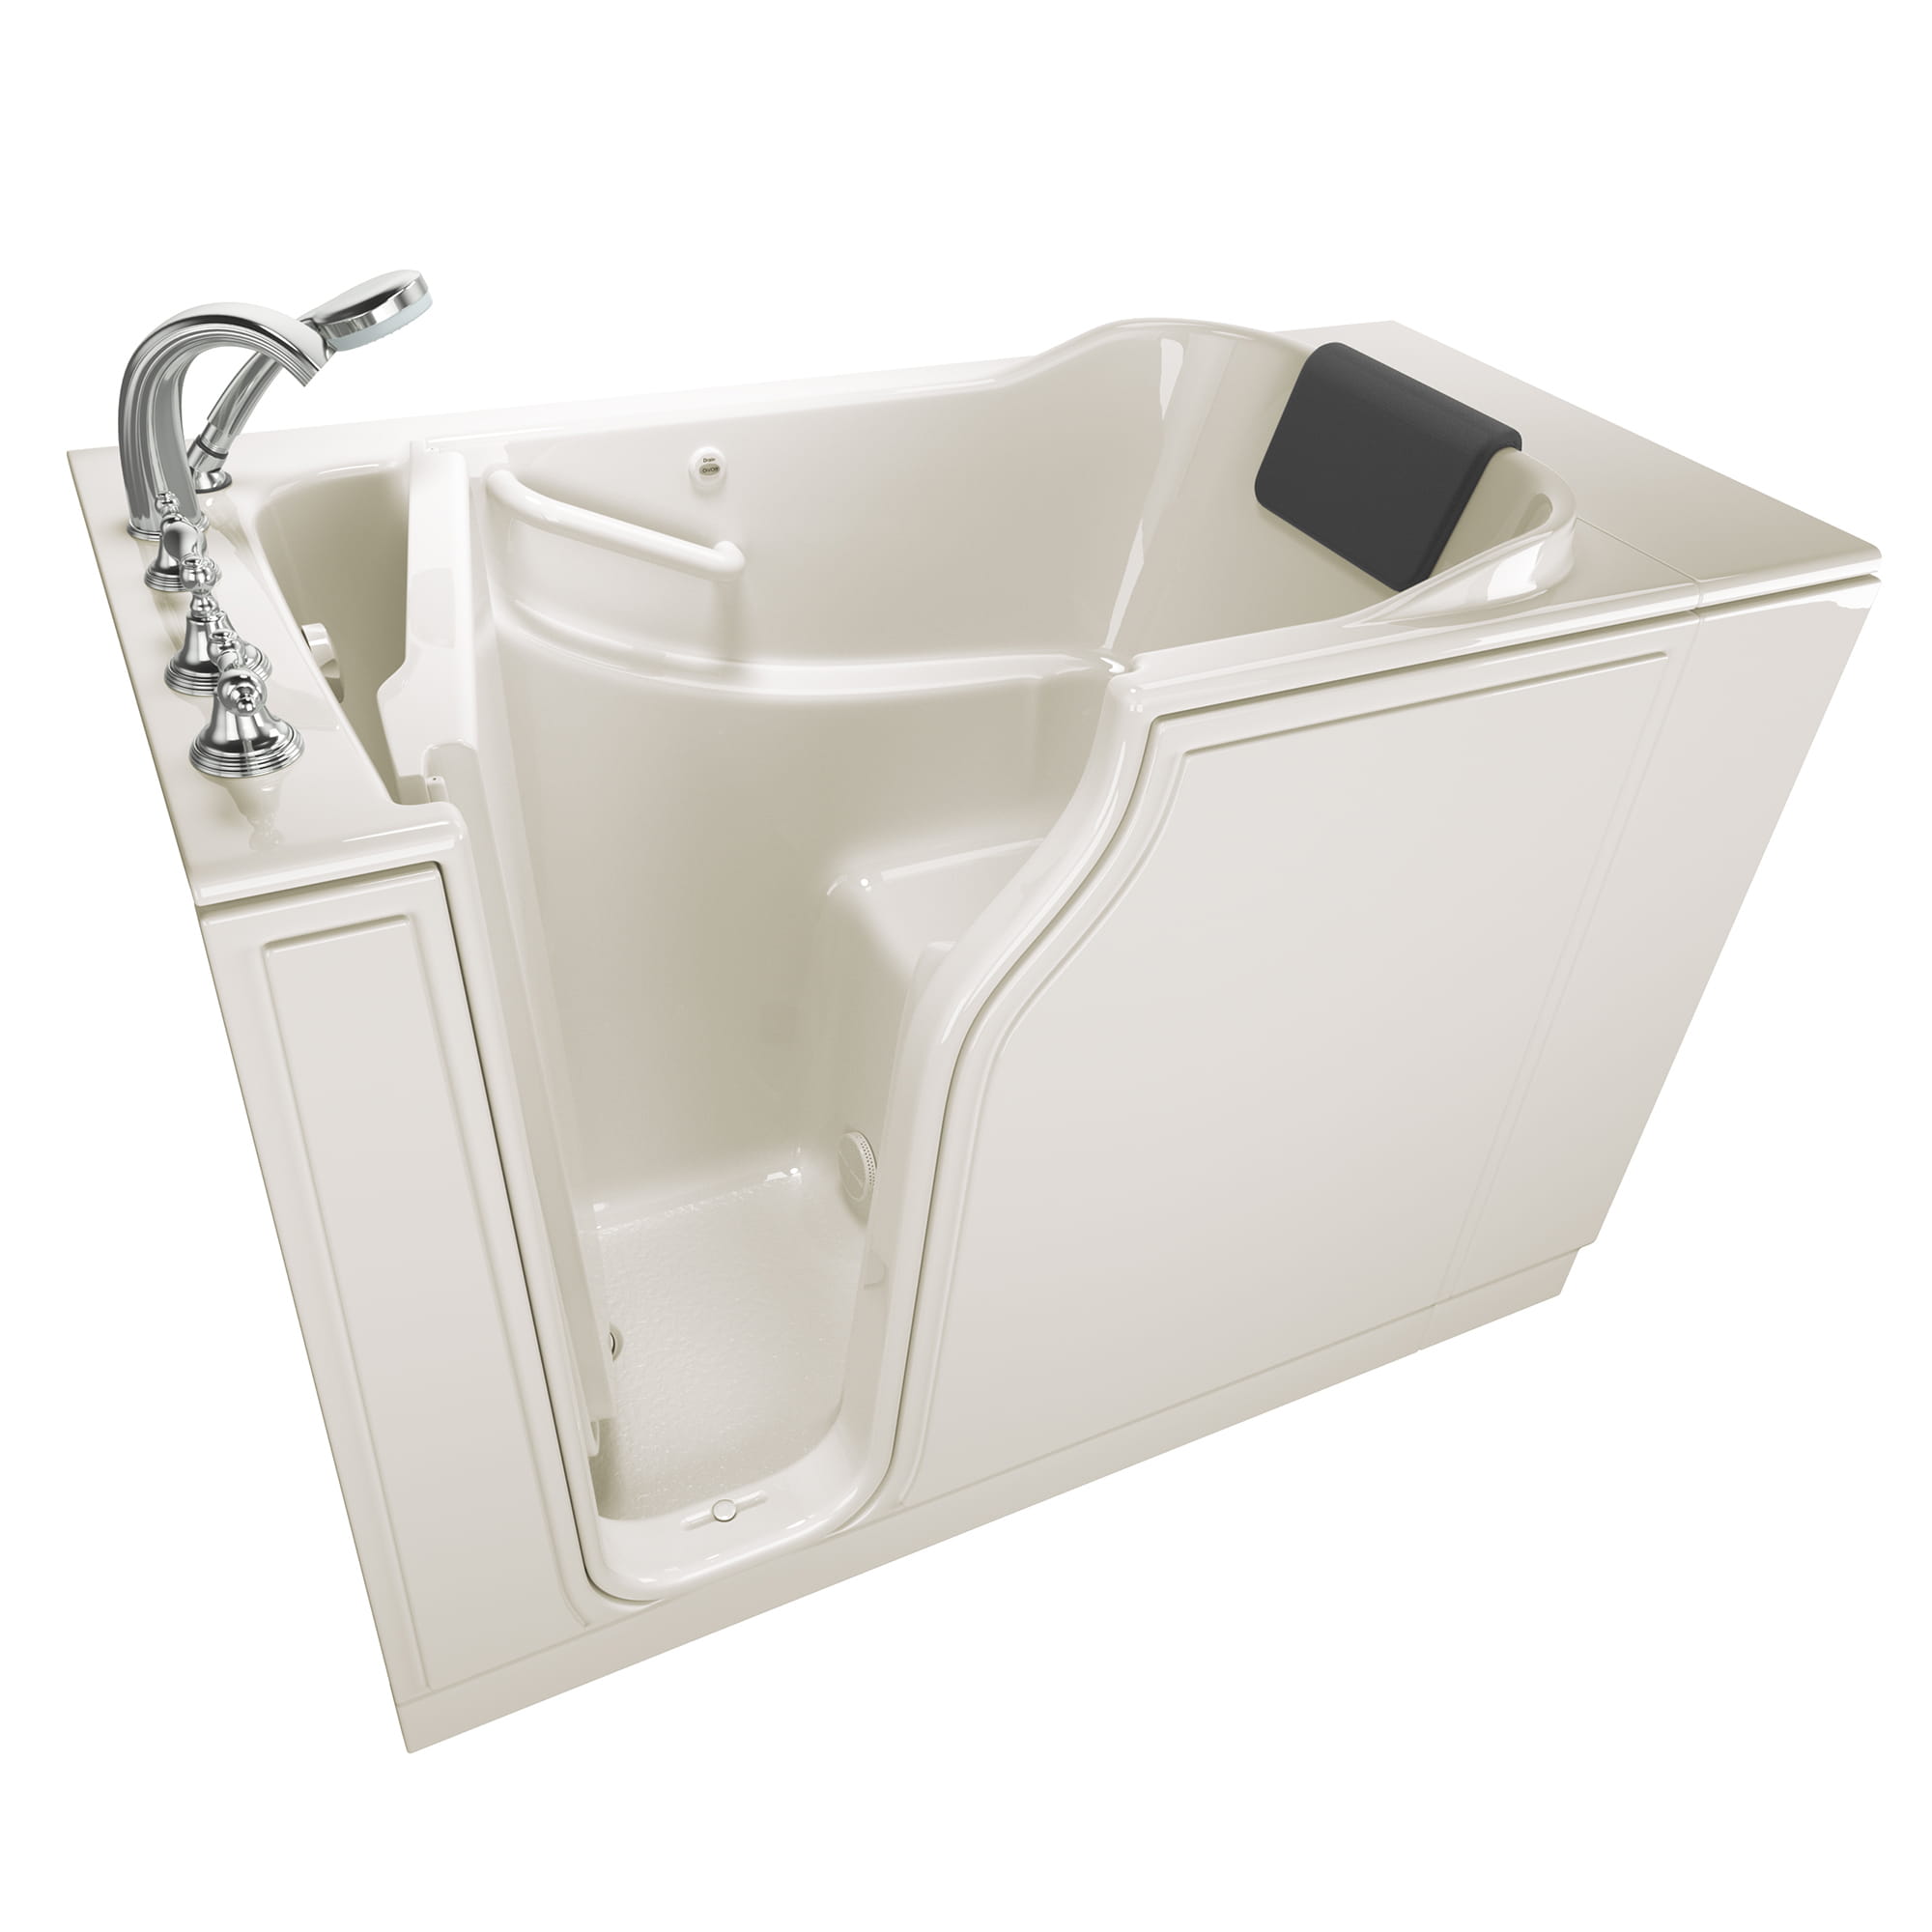 Gelcoat Premium Series 30 x 52 -Inch Walk-in Tub With Soaker System - Left-Hand Drain With Faucet